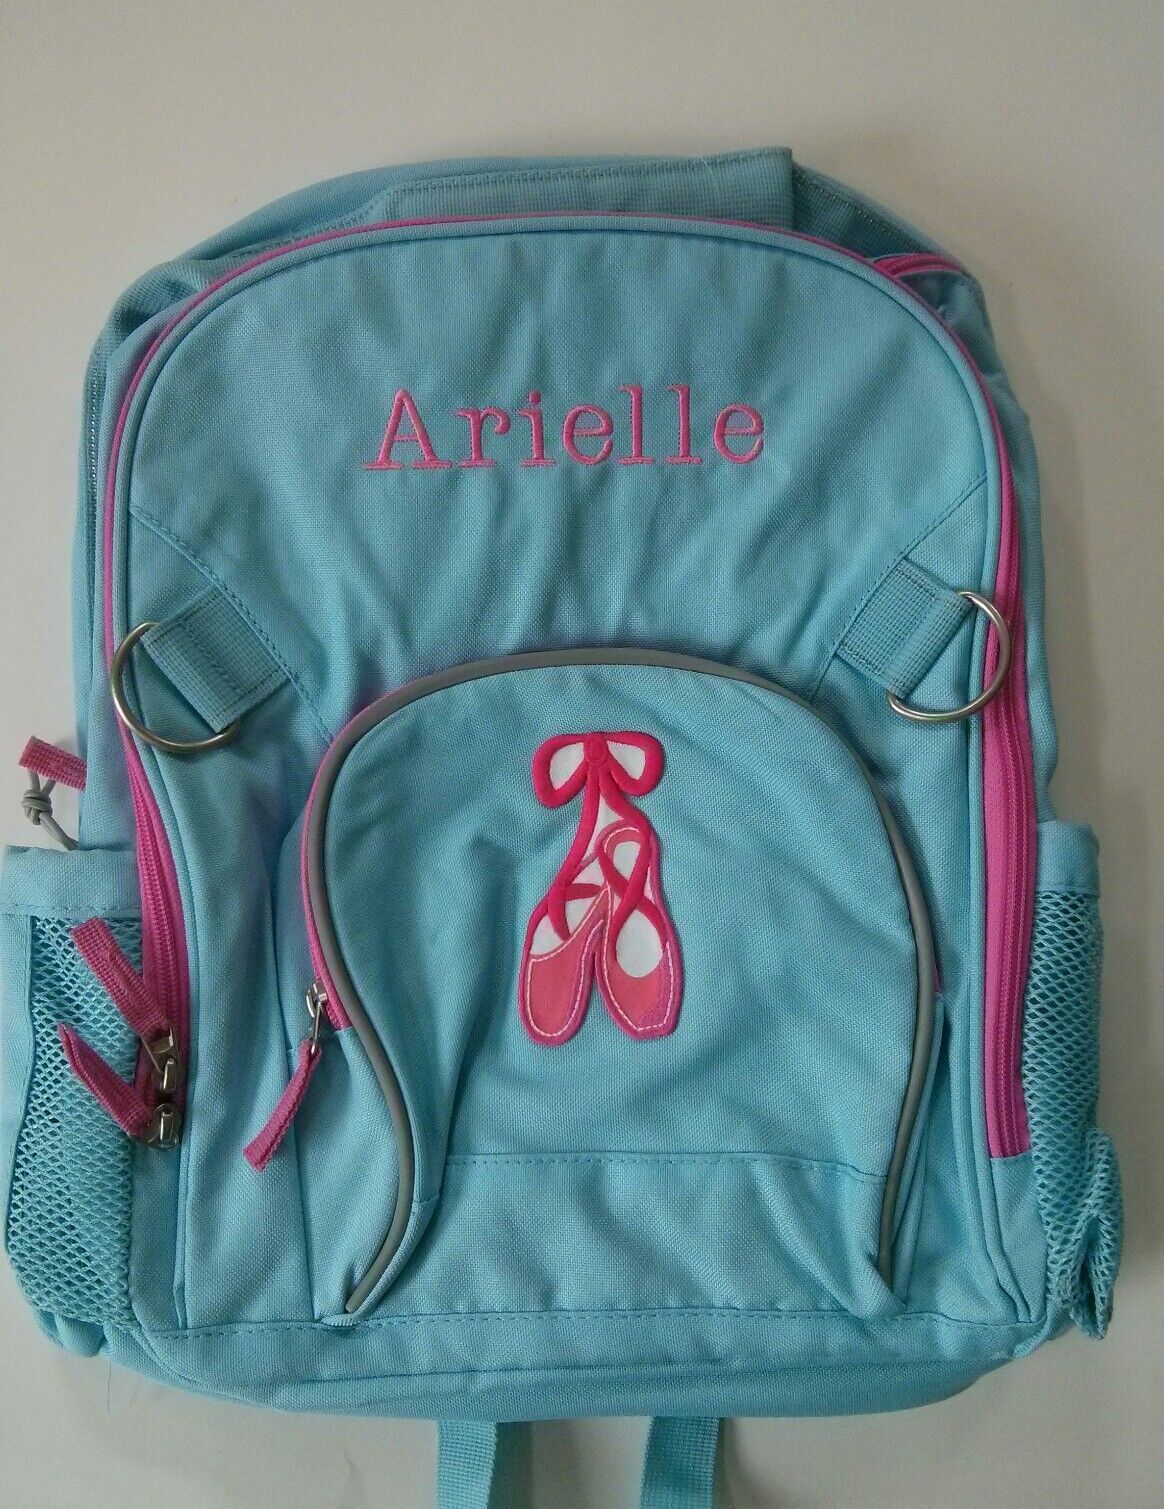 Pottery Barn Kids FAIRFAX Backpack Large Blue  Pink Ballet patch w/ ARIELLE New